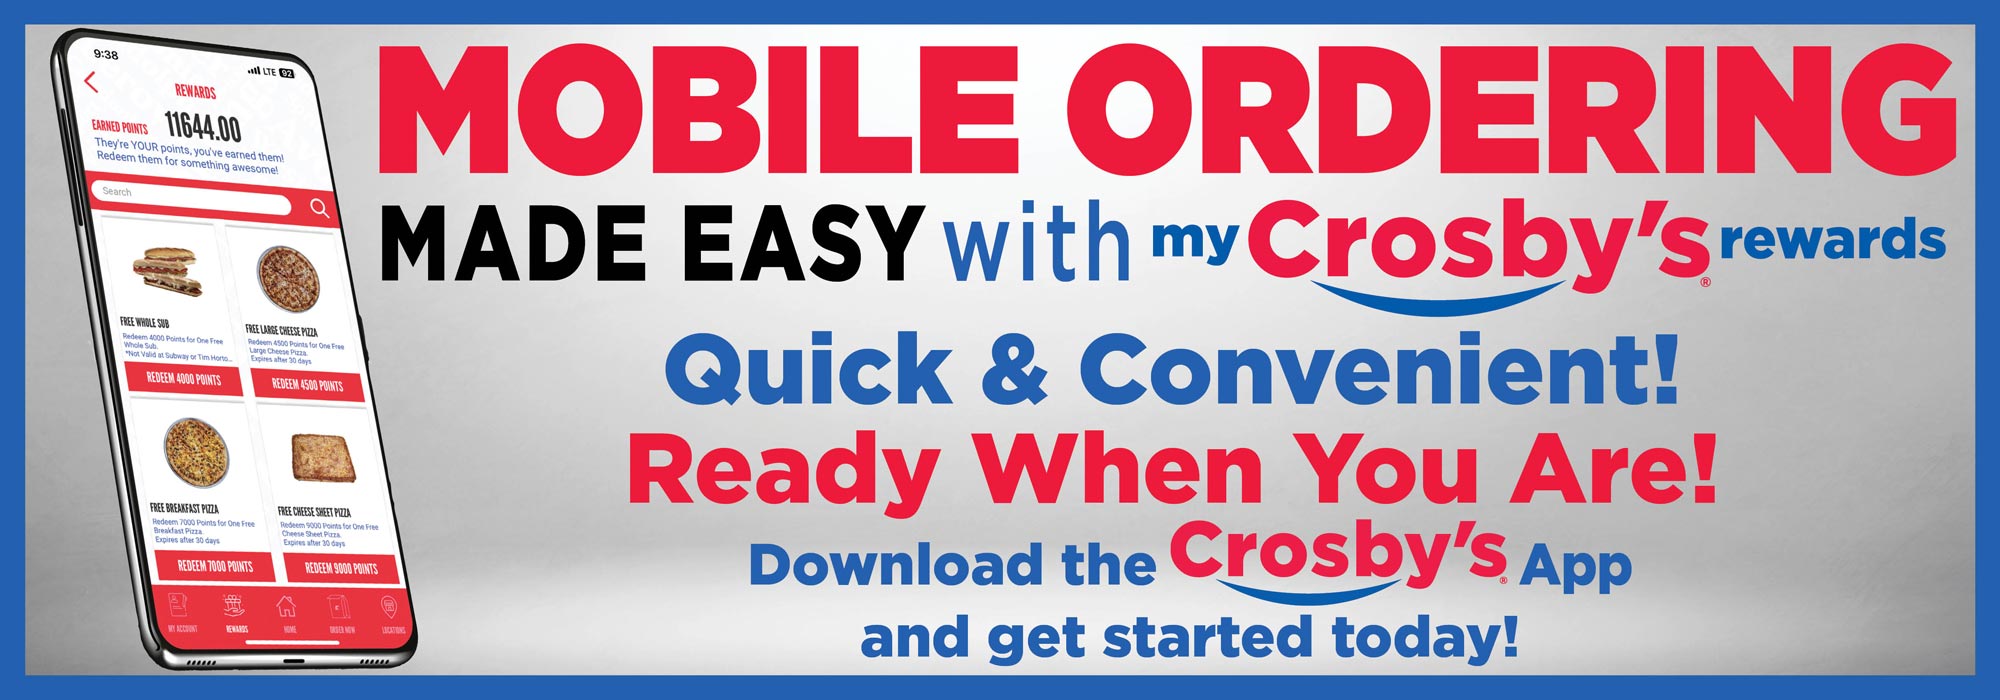 Mobile Ordering Made Easy with My Crosby's Rewards